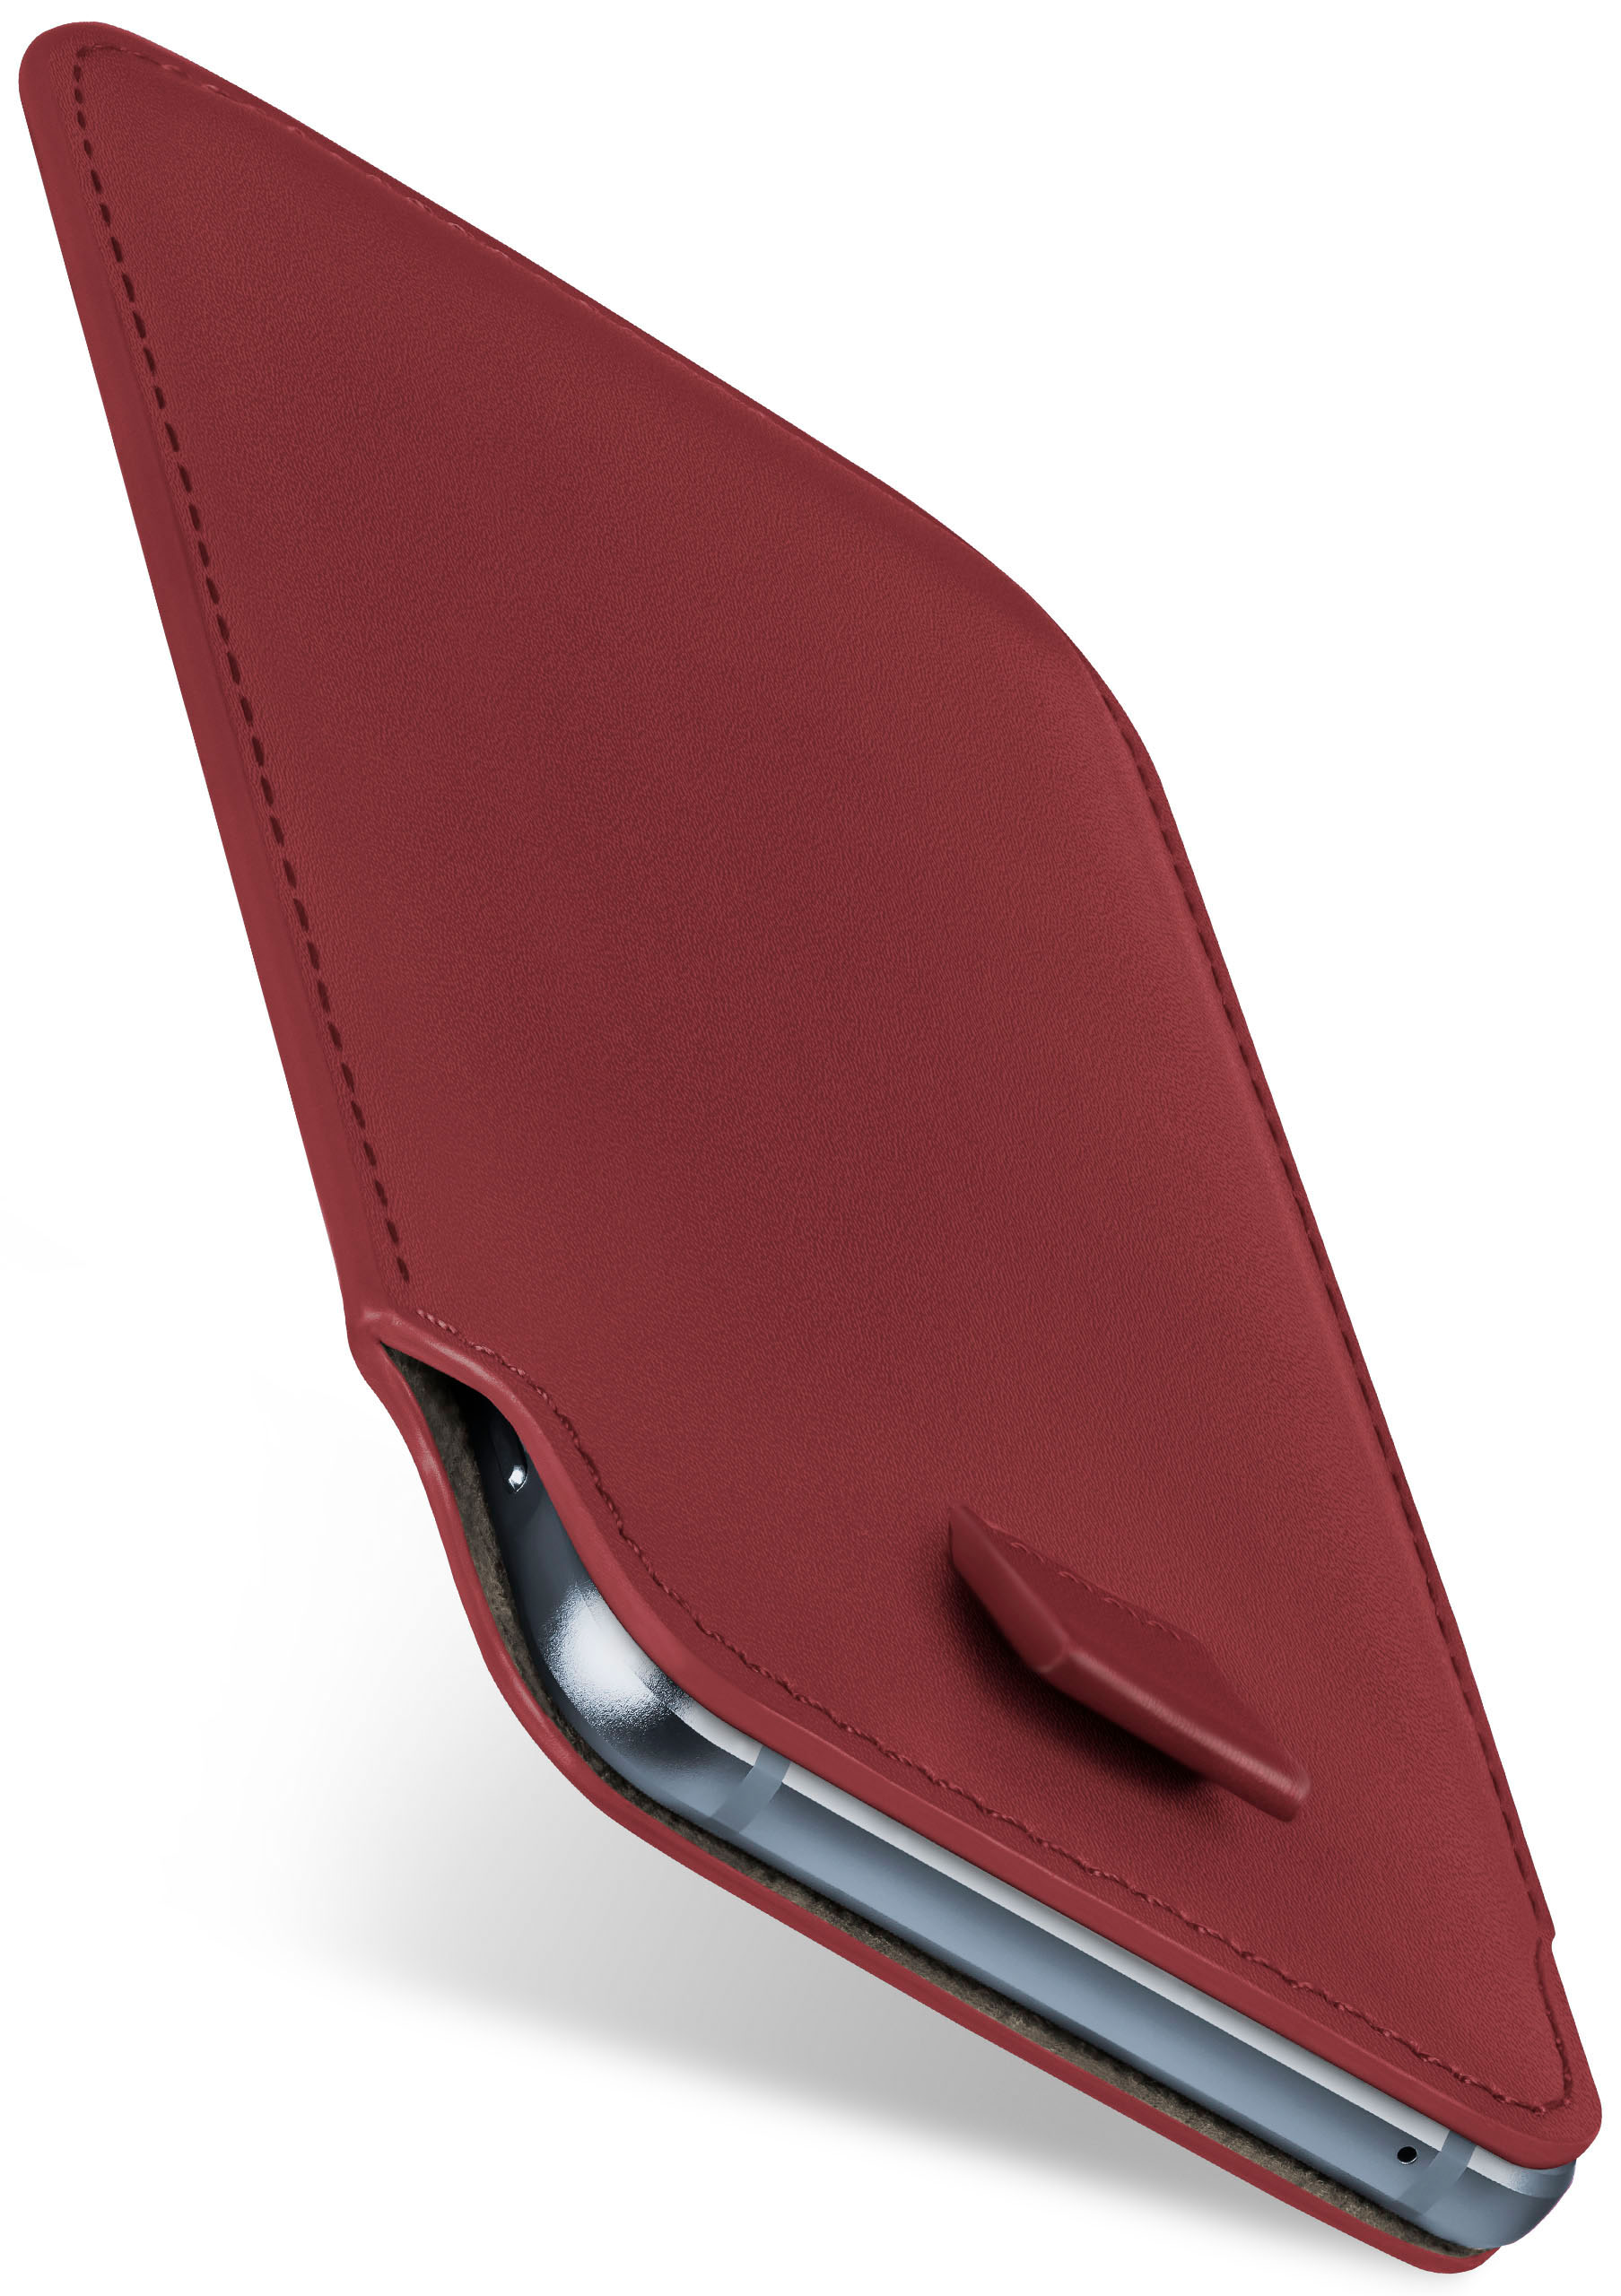 MOEX Slide Case, Full Cover, Arc Xperia Sony, Maroon-Red S, Ericsson